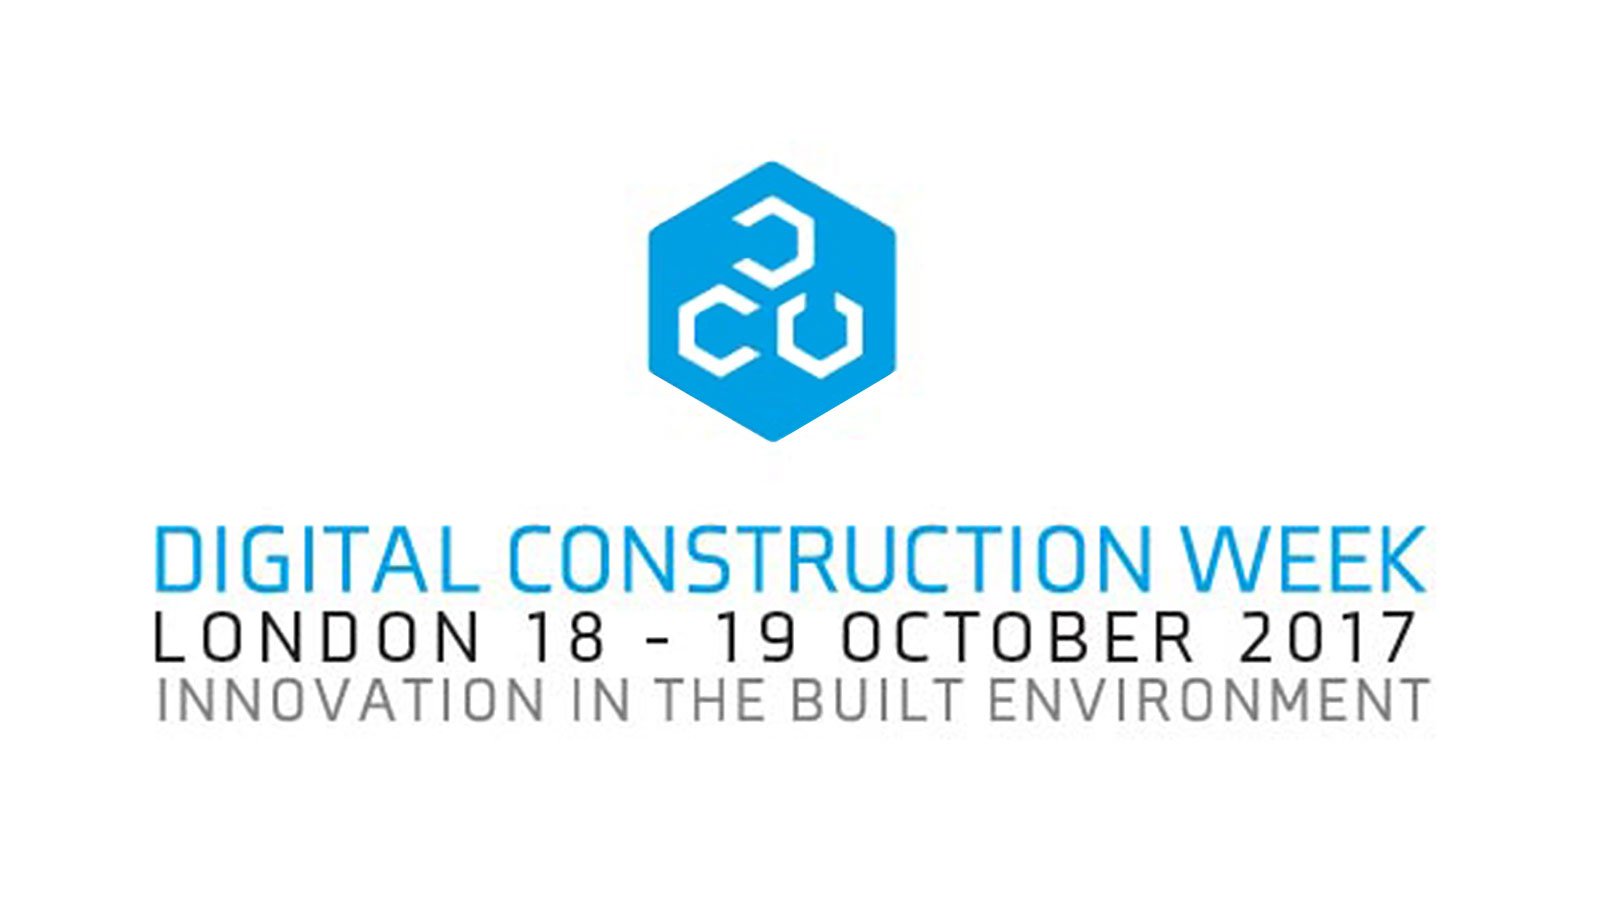 Come and meet Adoddle at Digital Construction week in London